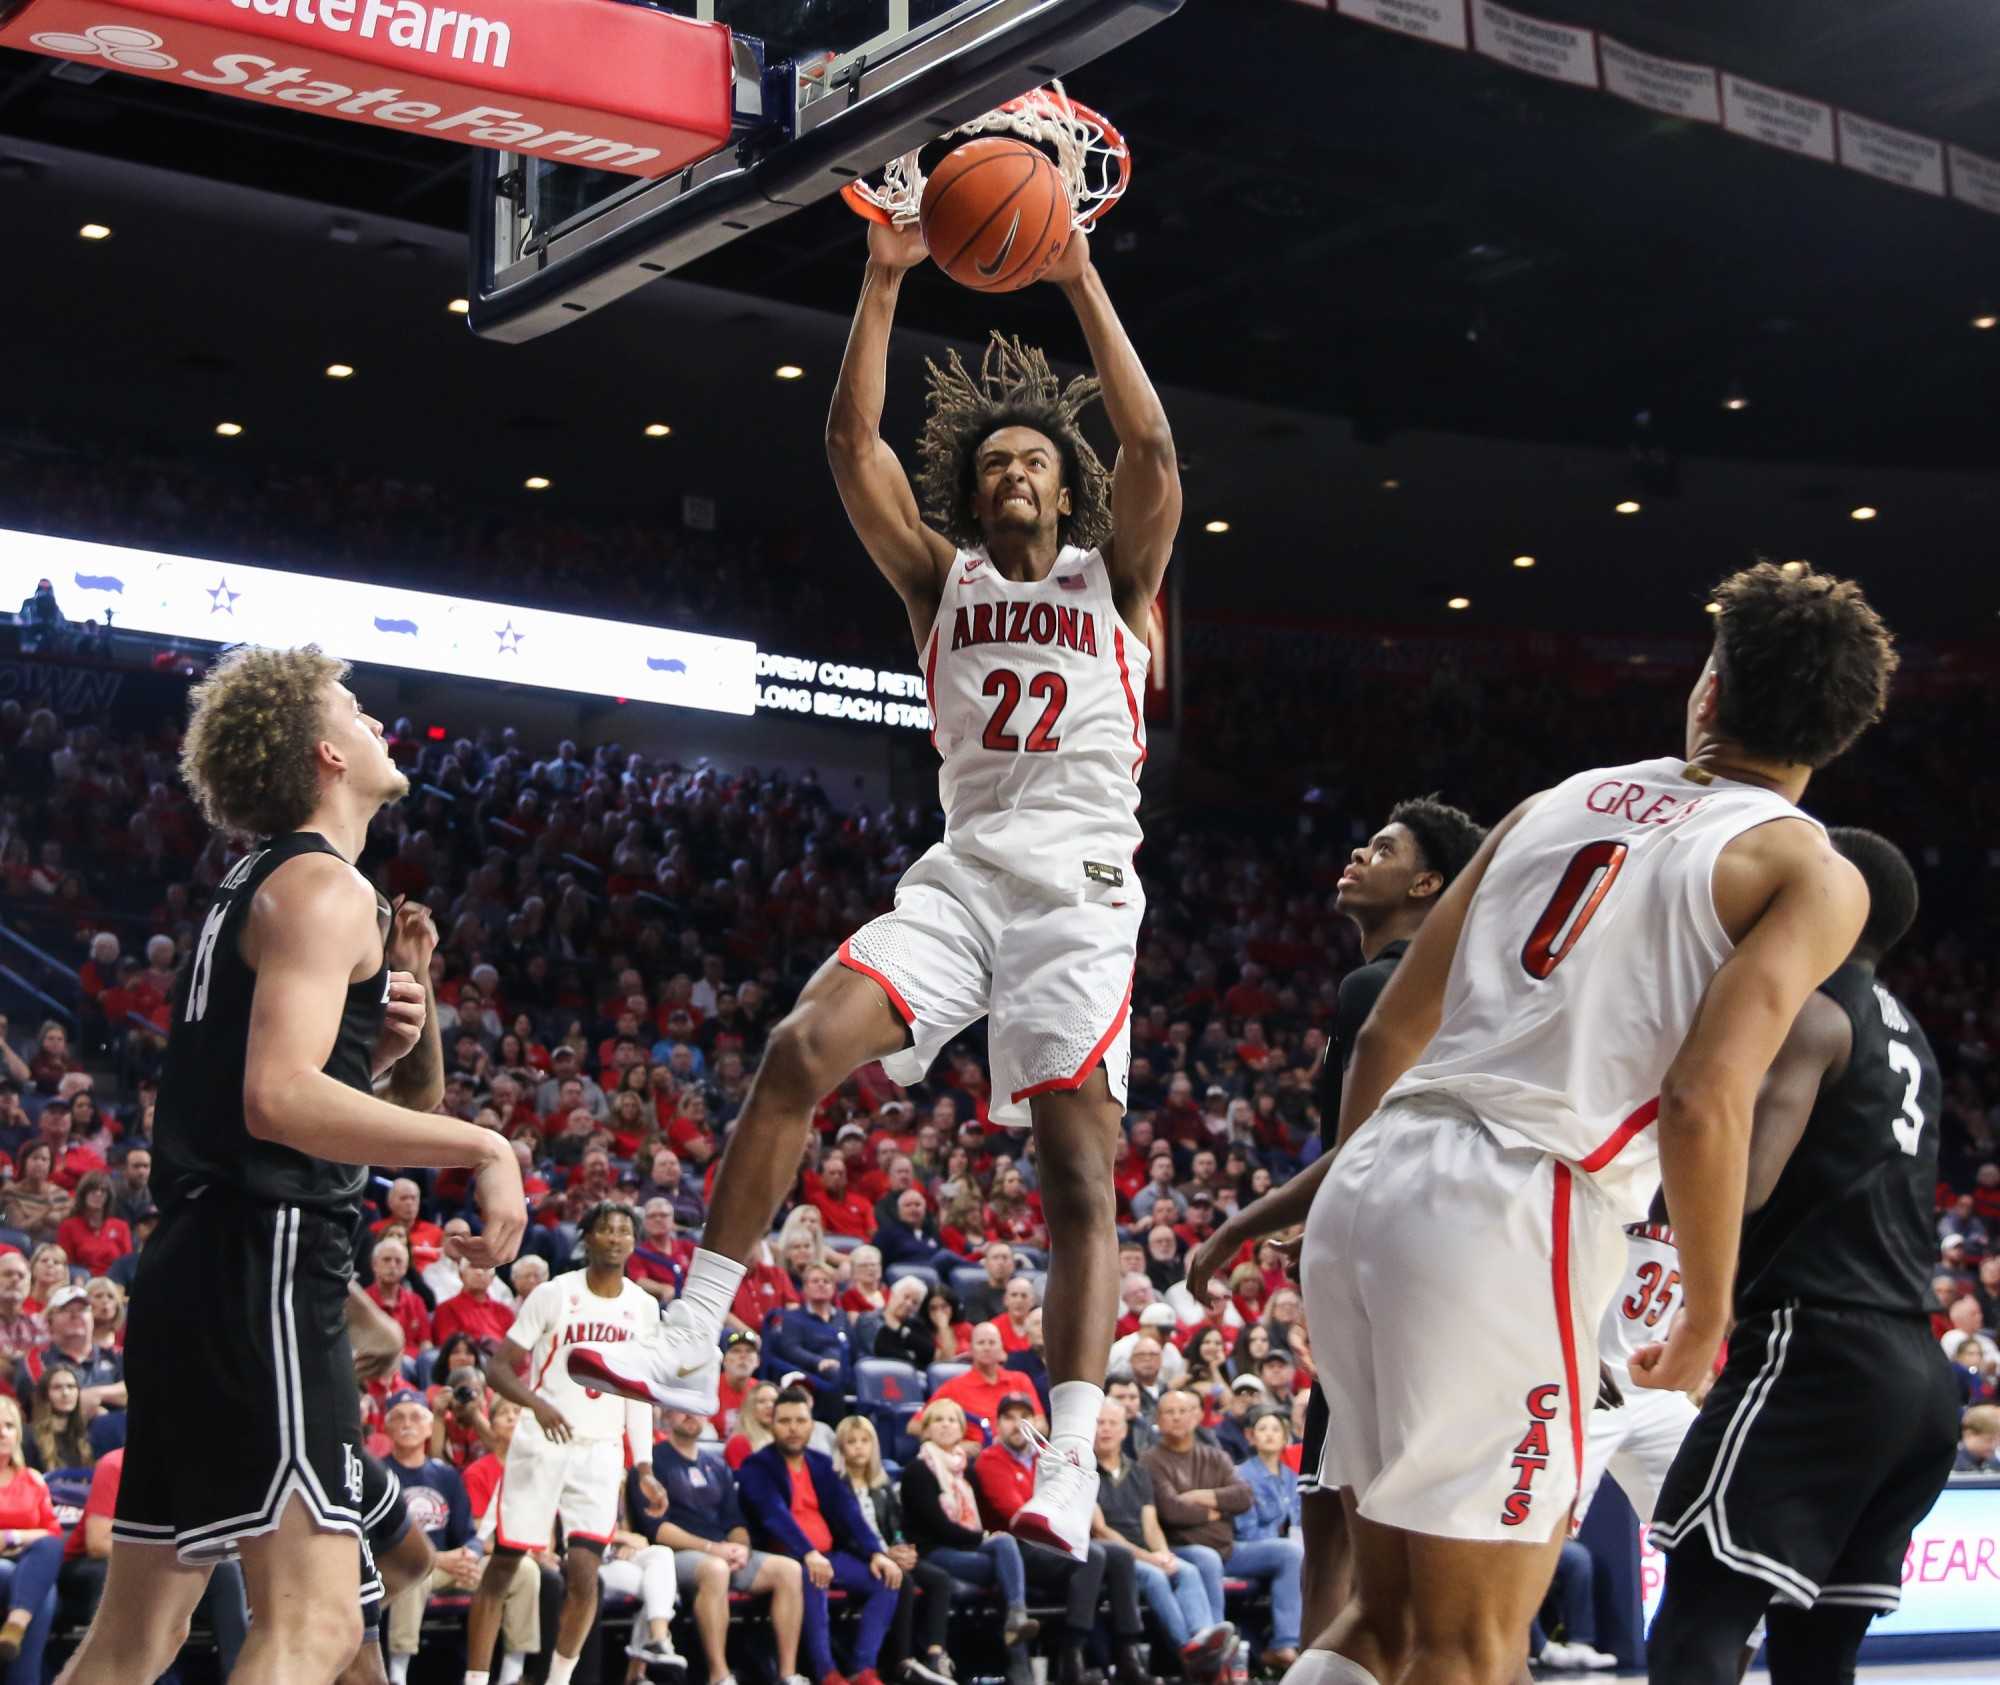 In the first round of the Wooden Legacy tournament, the Arizona men's basketball defeated Long Beach State 104-67. The Wildcats will travel to California and will take on Pepperdine University. 